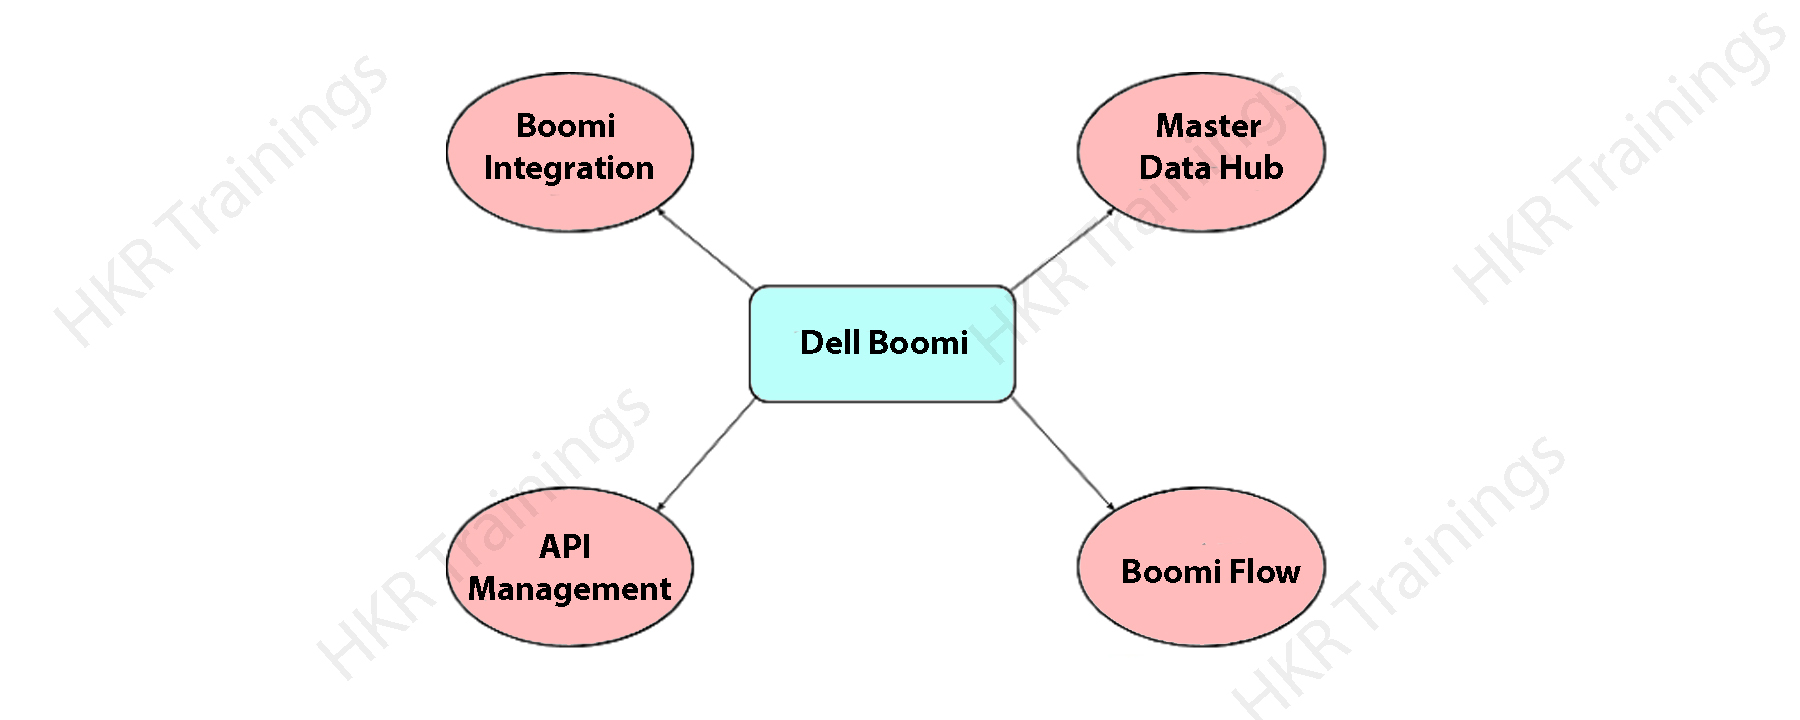 Dell Boomi Tutorial for Beginners: Learn Dell Boomi from Step by Step